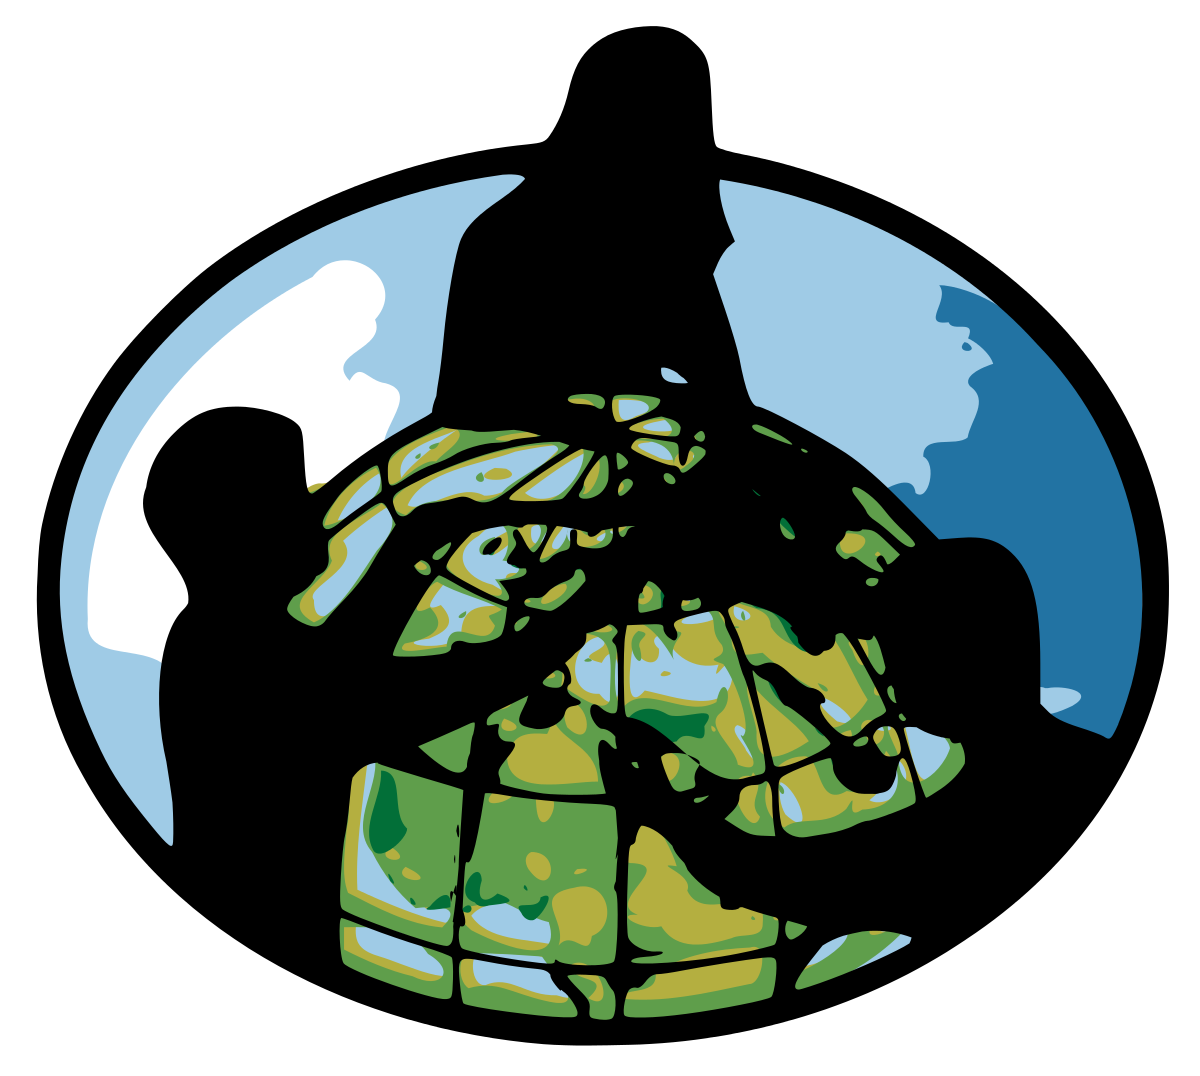 GLOBE logo showing the silhouette of three children pointing at the Earth